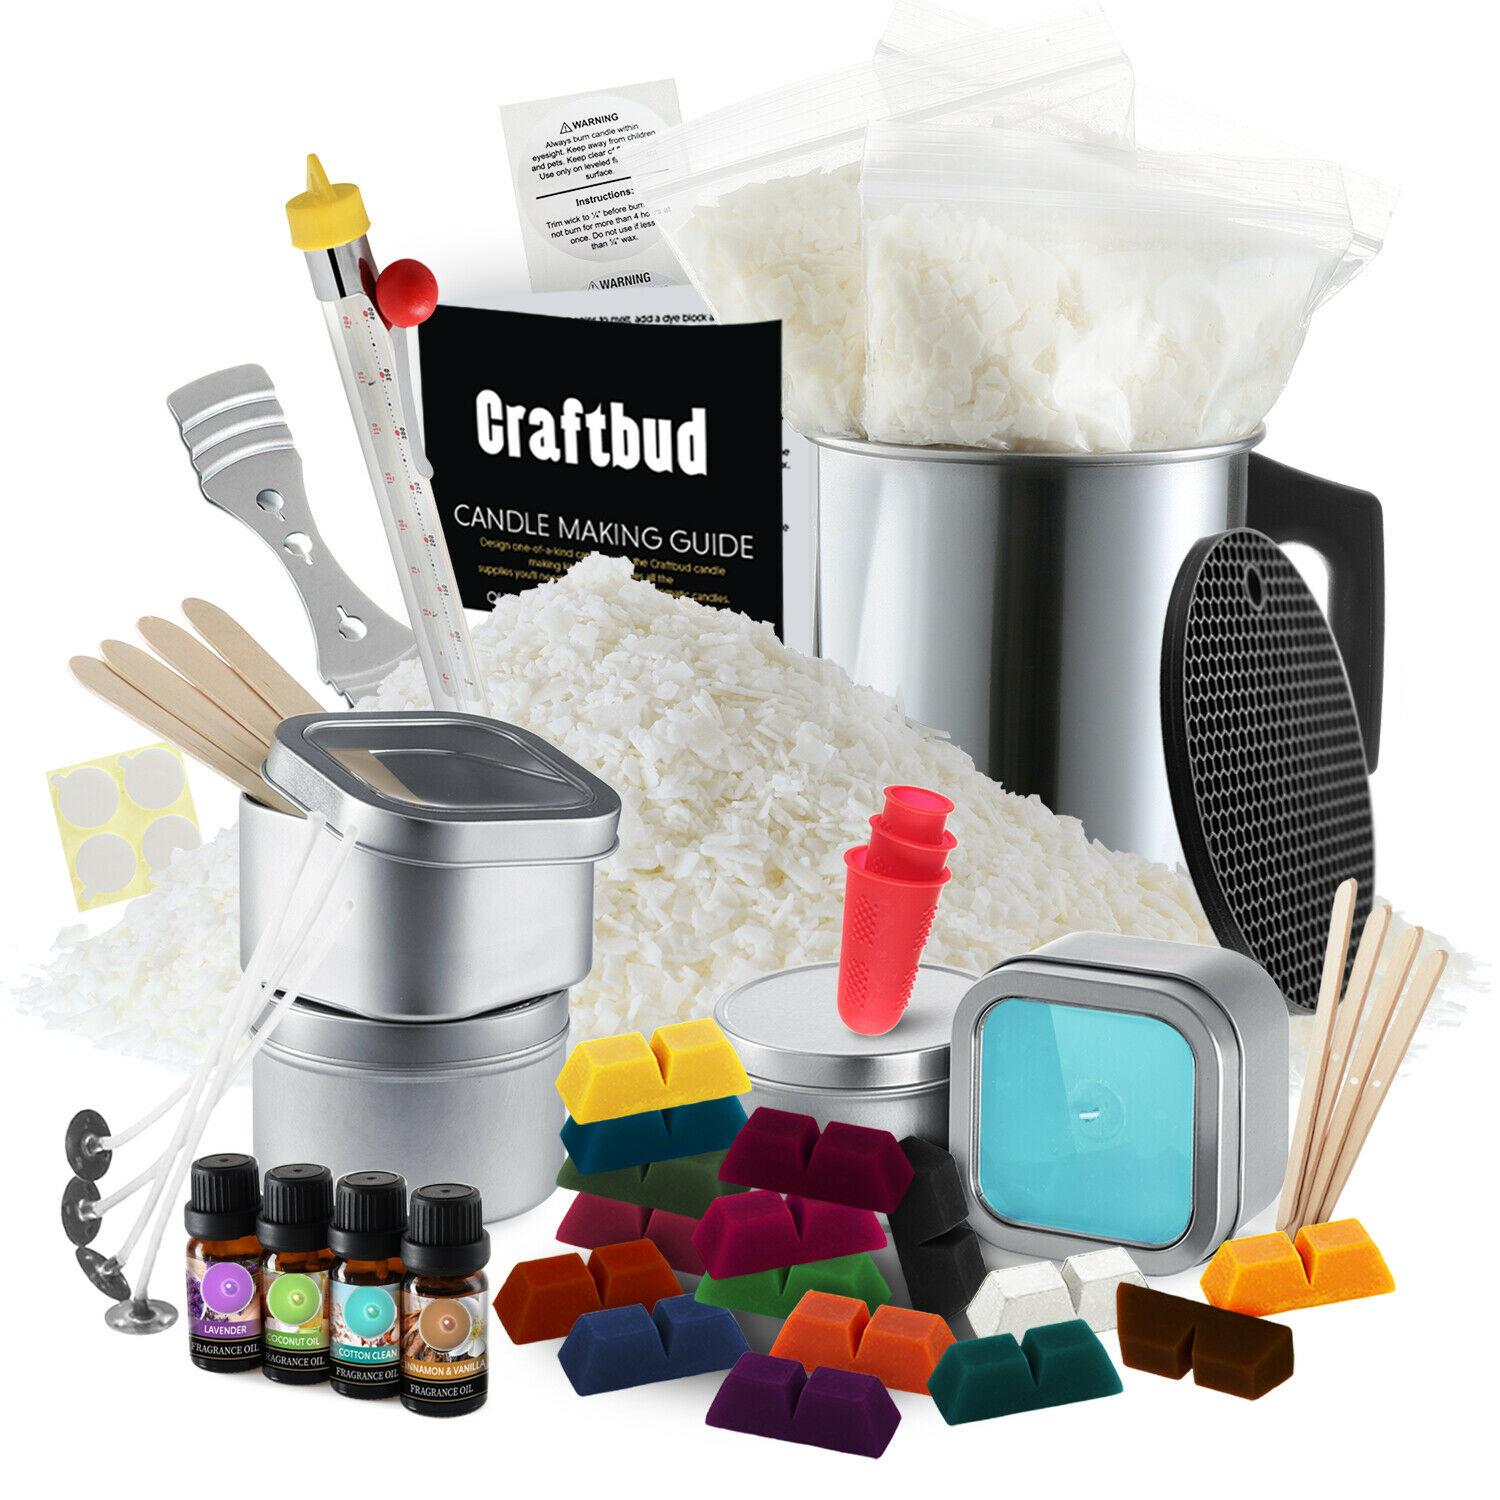 Image 1 - Candle Making Kit, Soy Wax Flakes, Wicks, Pitcher, Fragrance Oil, 16 Color Dyes